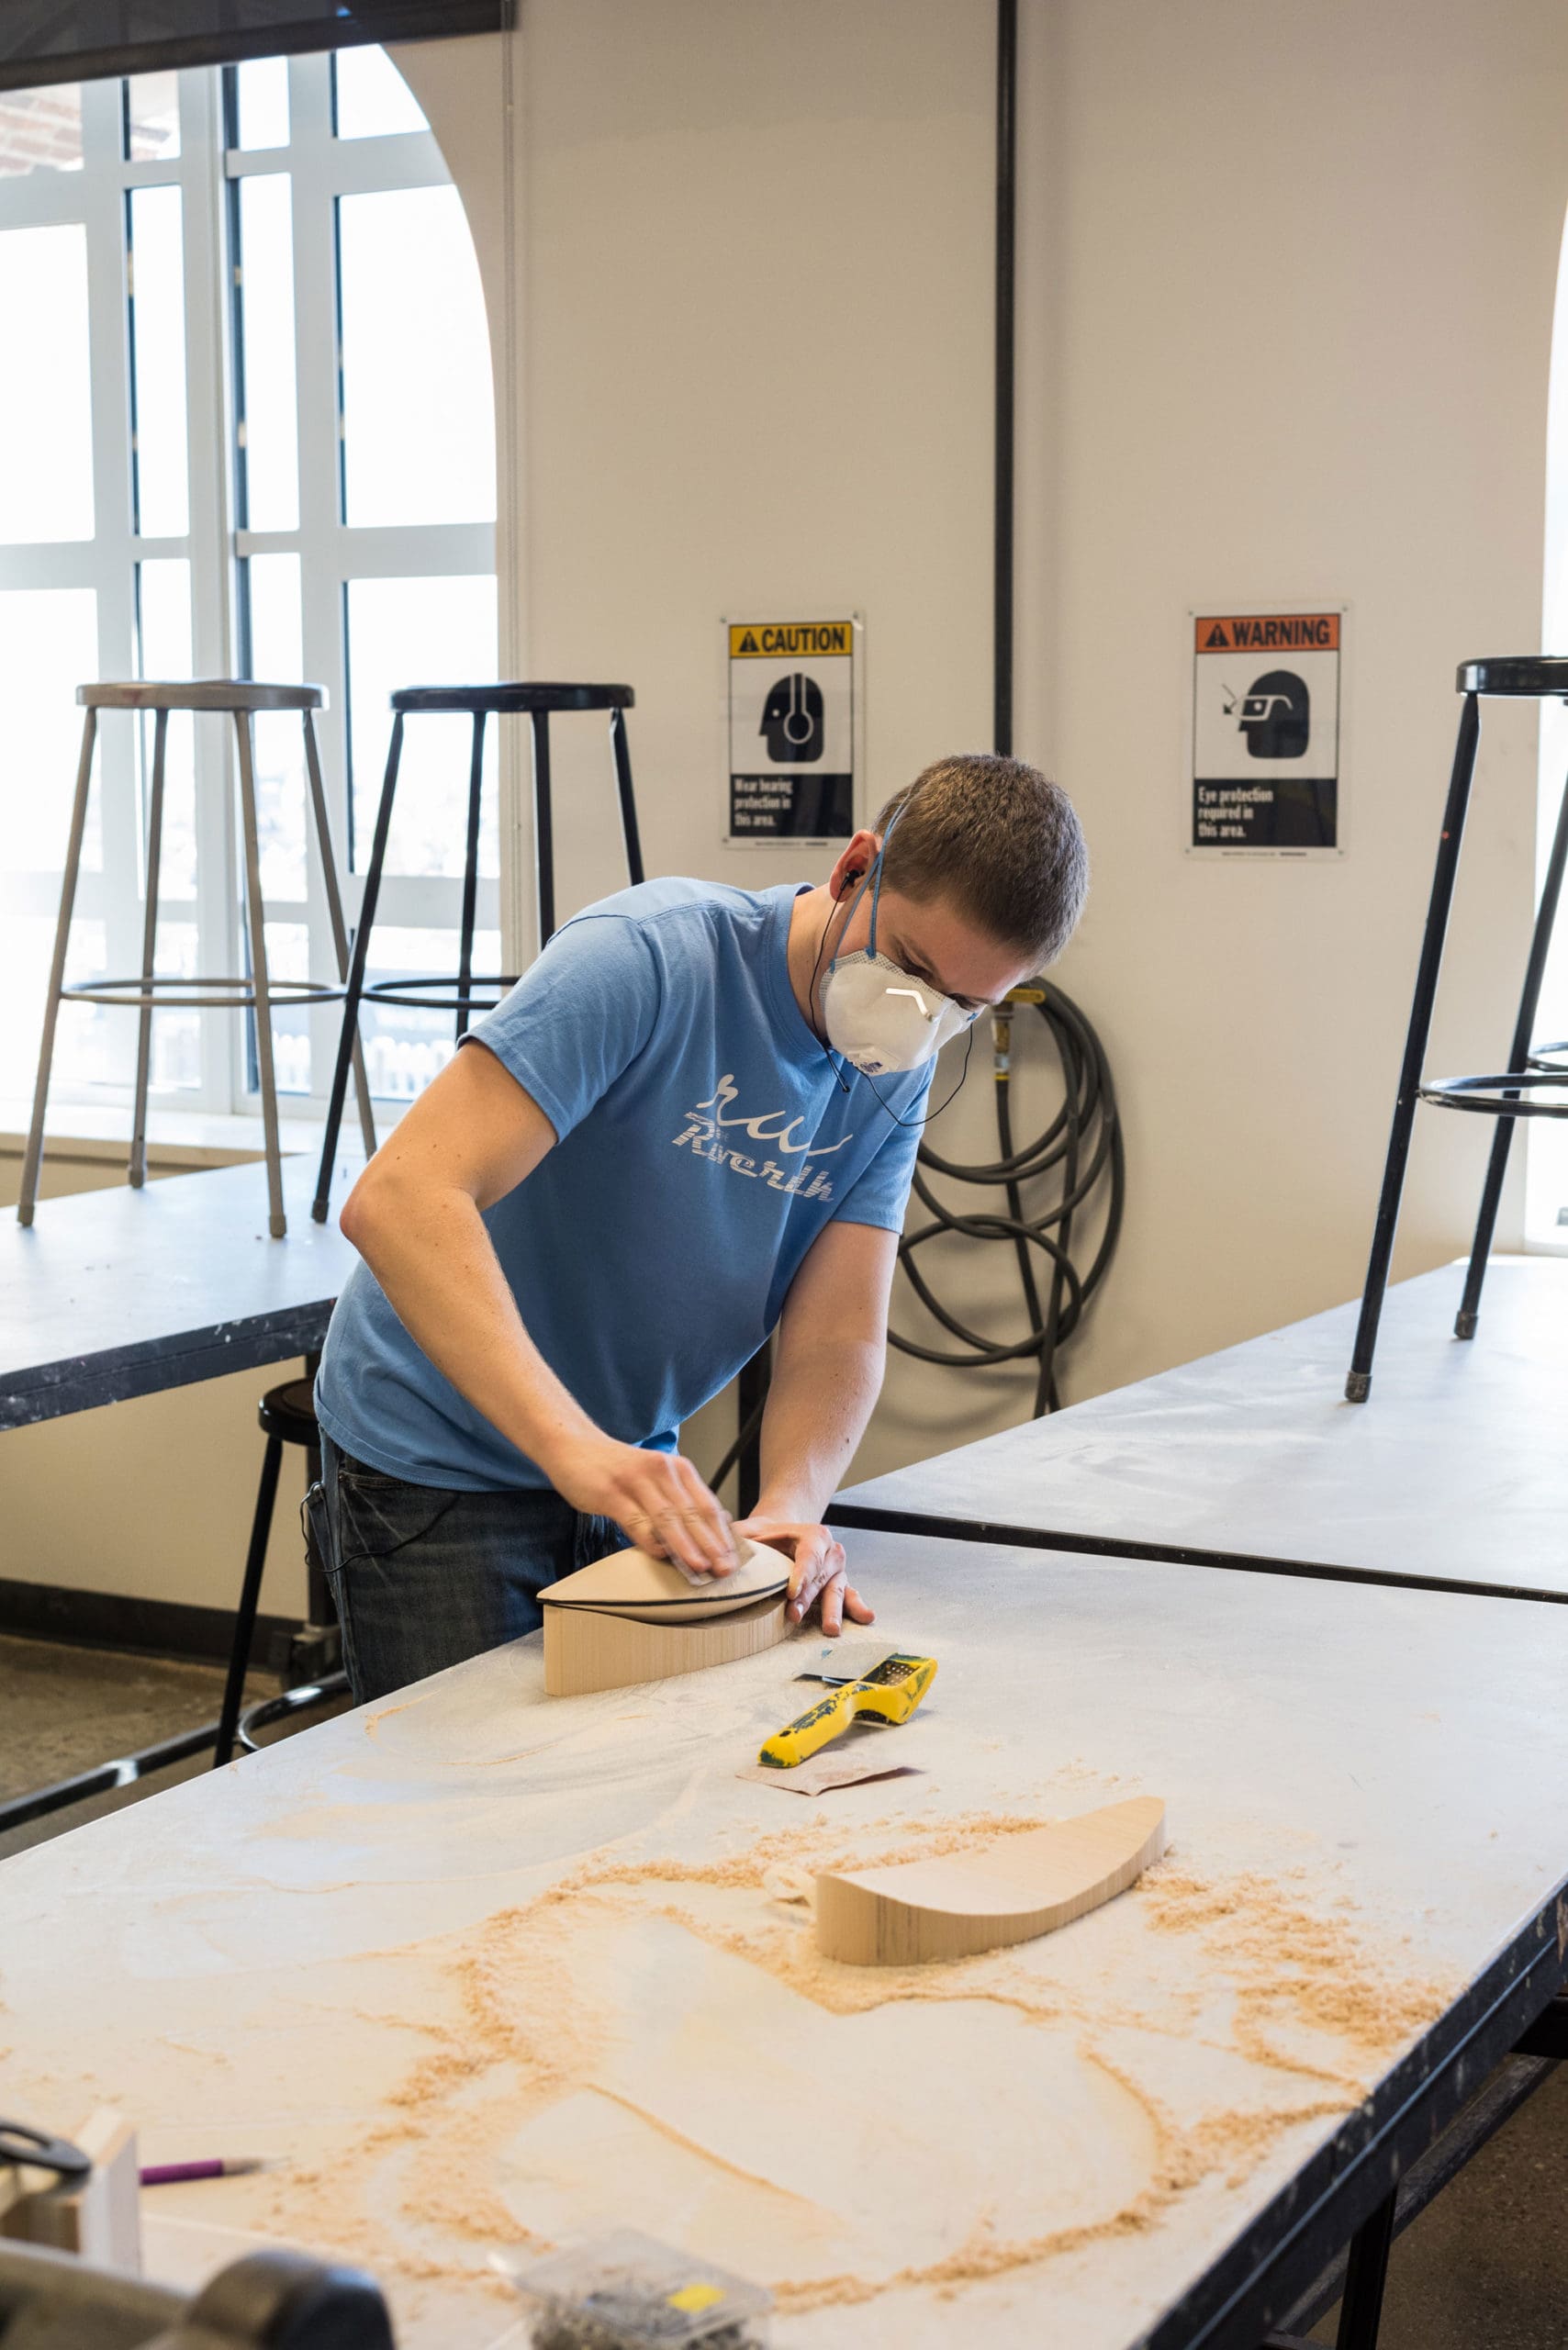 Image of a student sanding a piece of wood in a workshop for a transportation design class